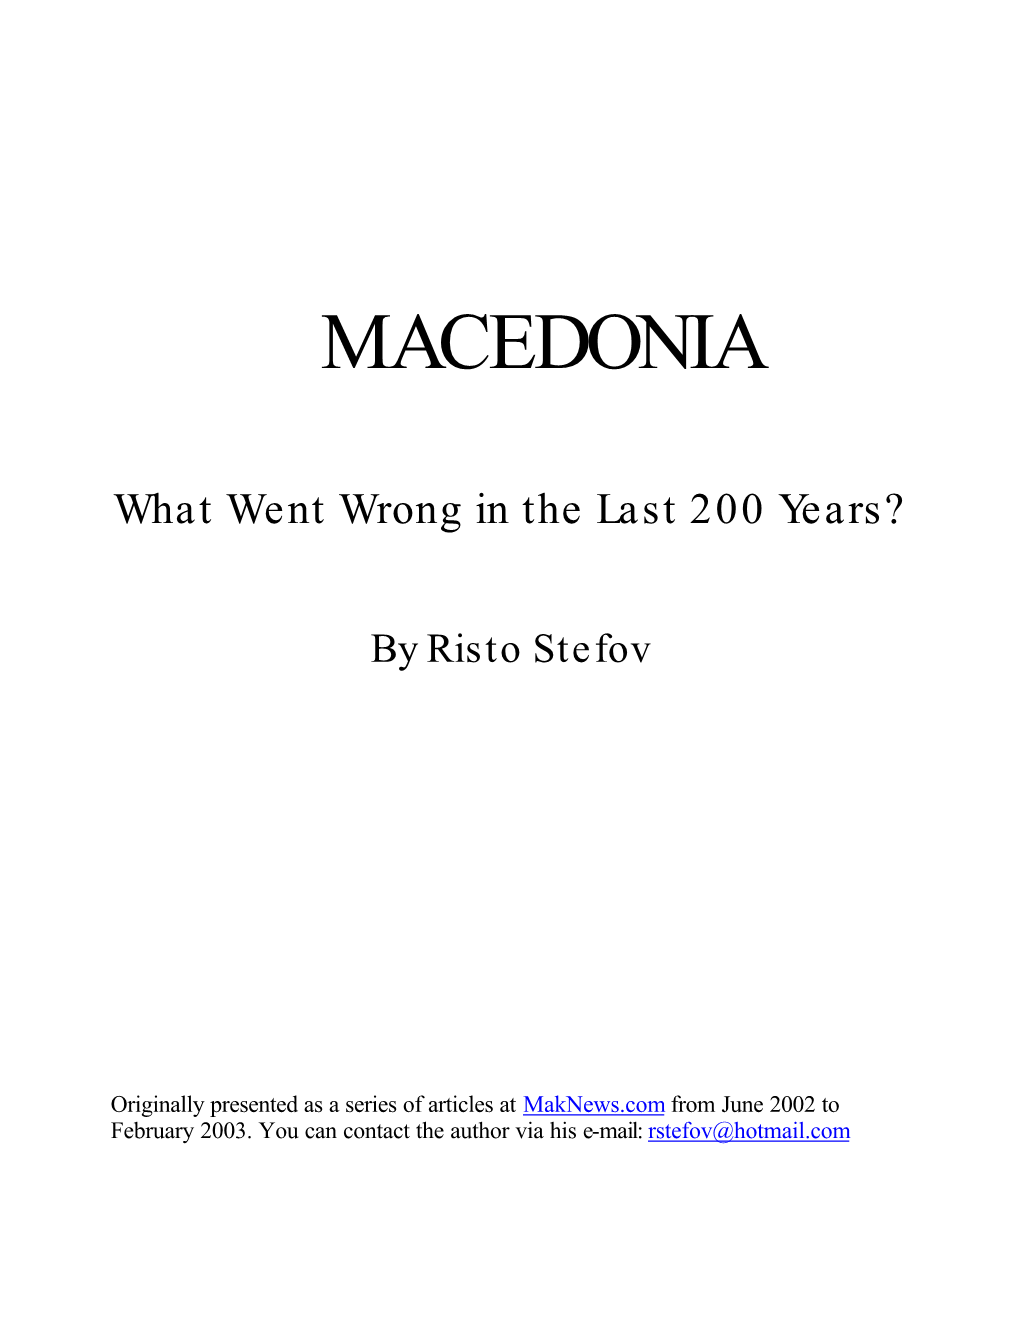 Macedonia for the Macedonians" Which Rang out Like Loud Church Bells Throughout Macedonia